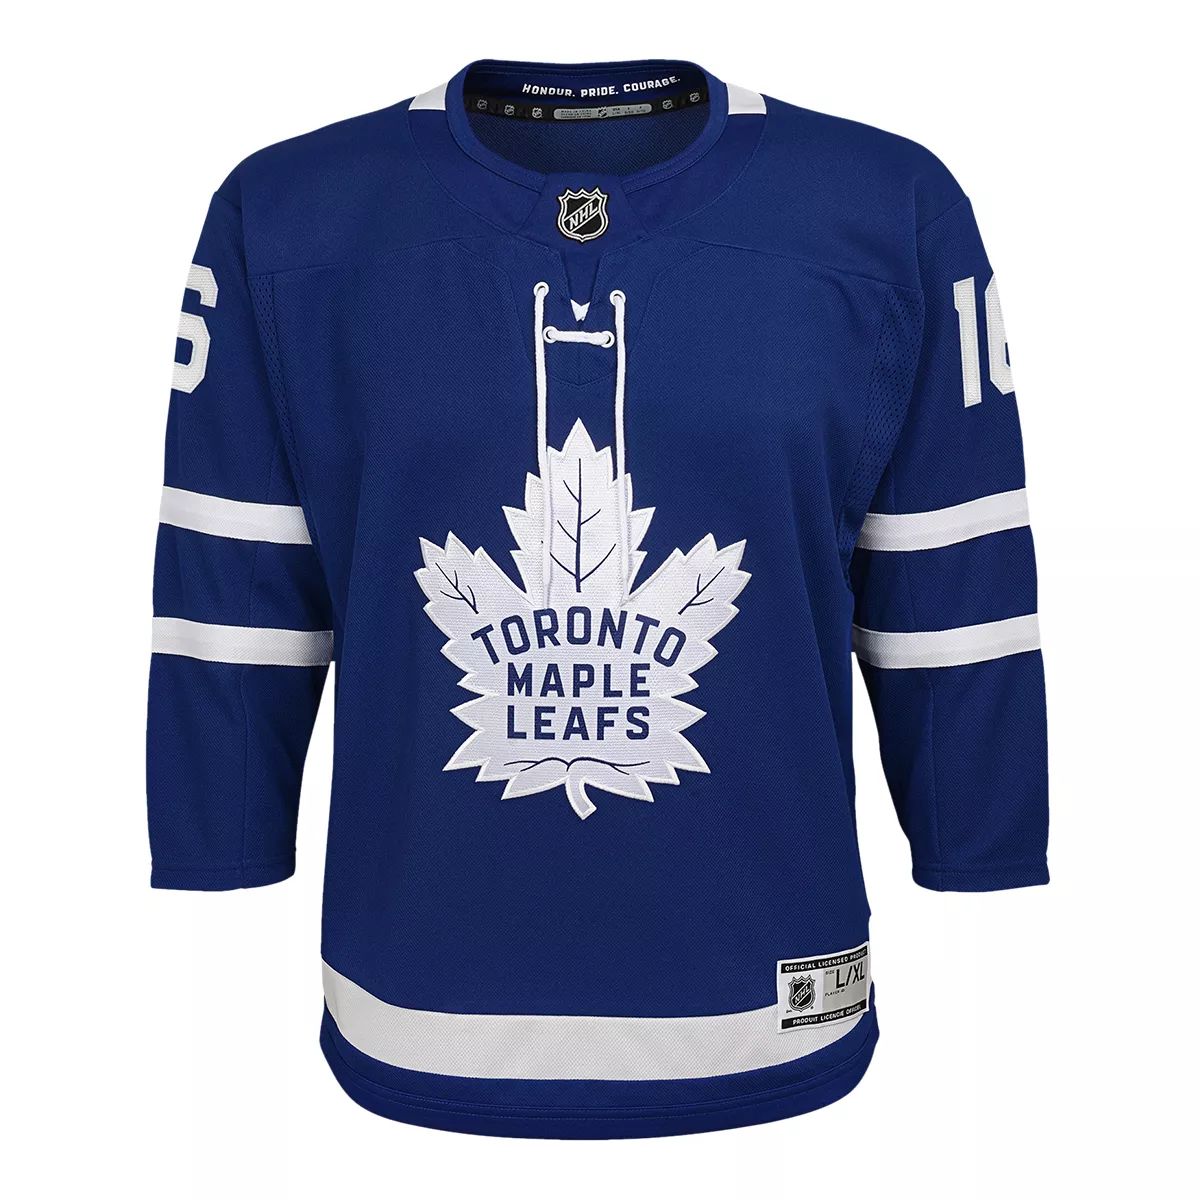 Image of Toronto Maple Leafs Mitch Marner Replica Jersey Toddler Hockey NHL